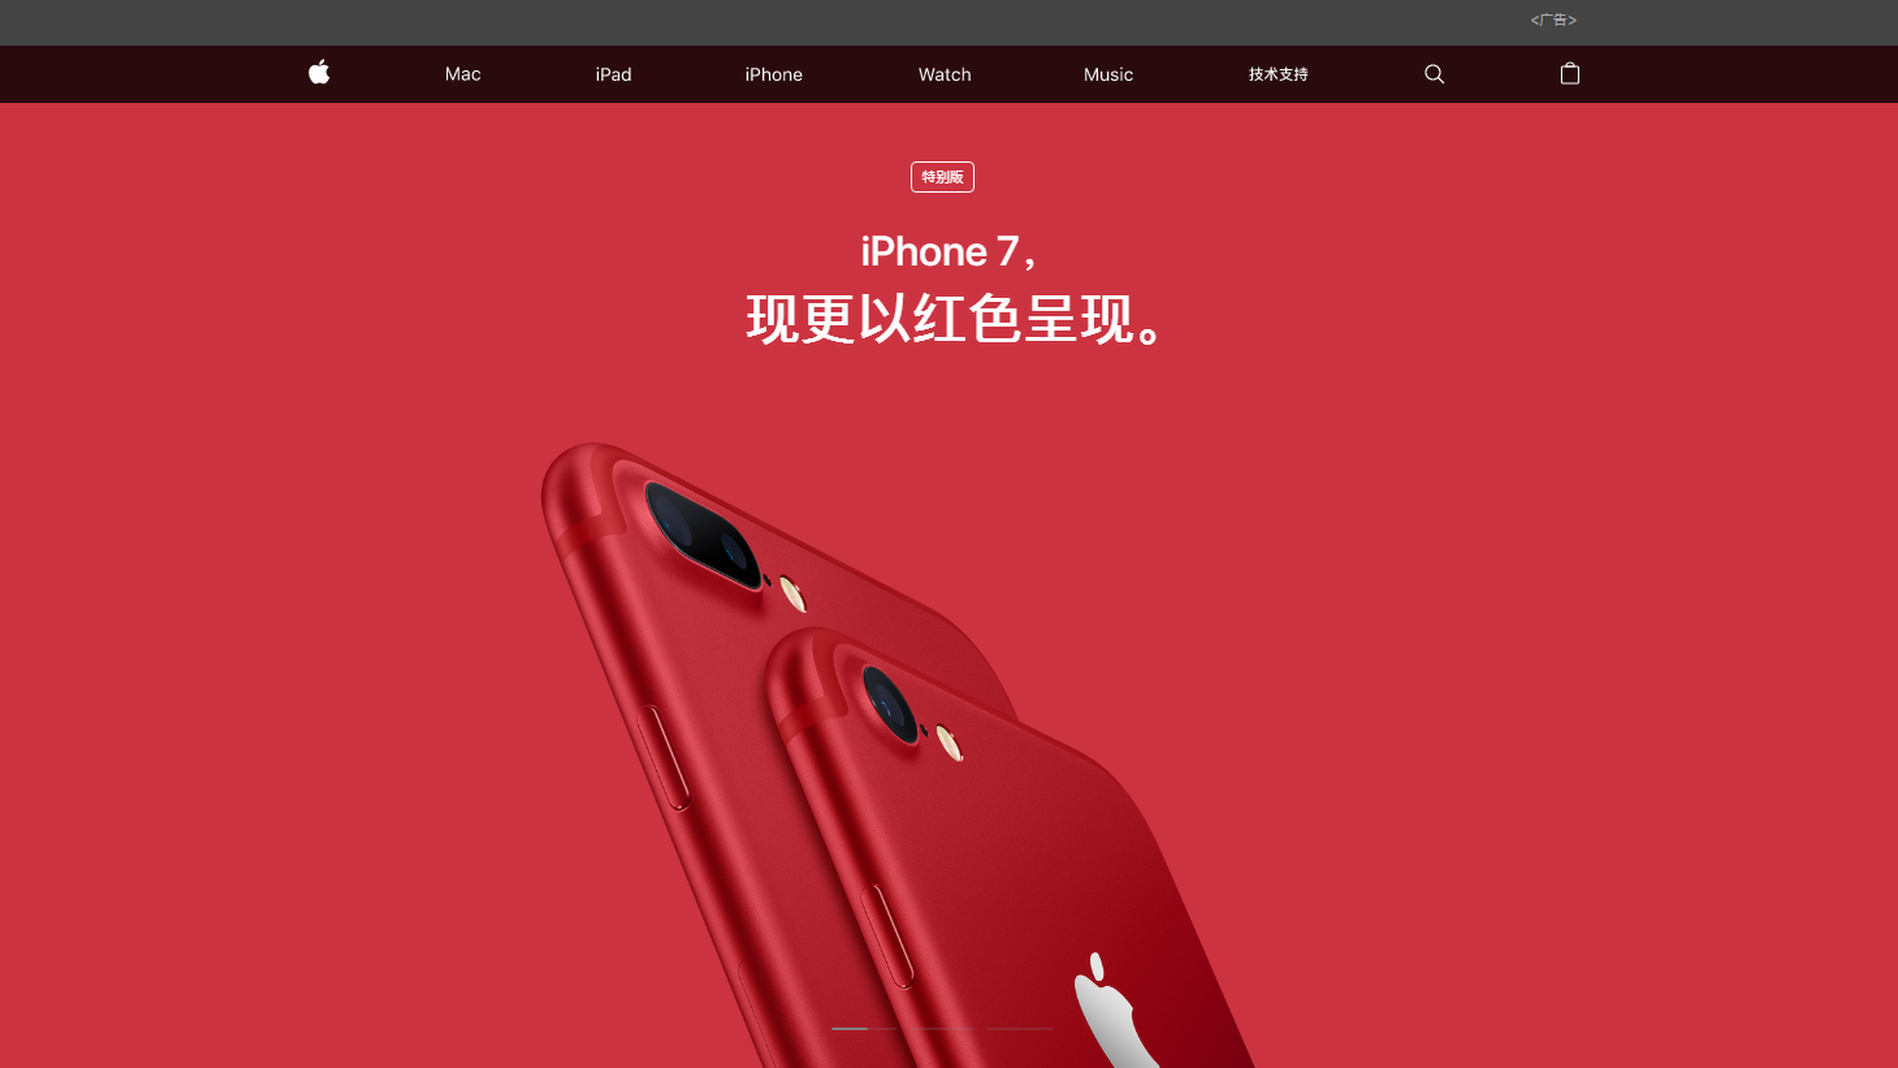 Why Apple's red iPhones are not 'Red' in China - BBC News